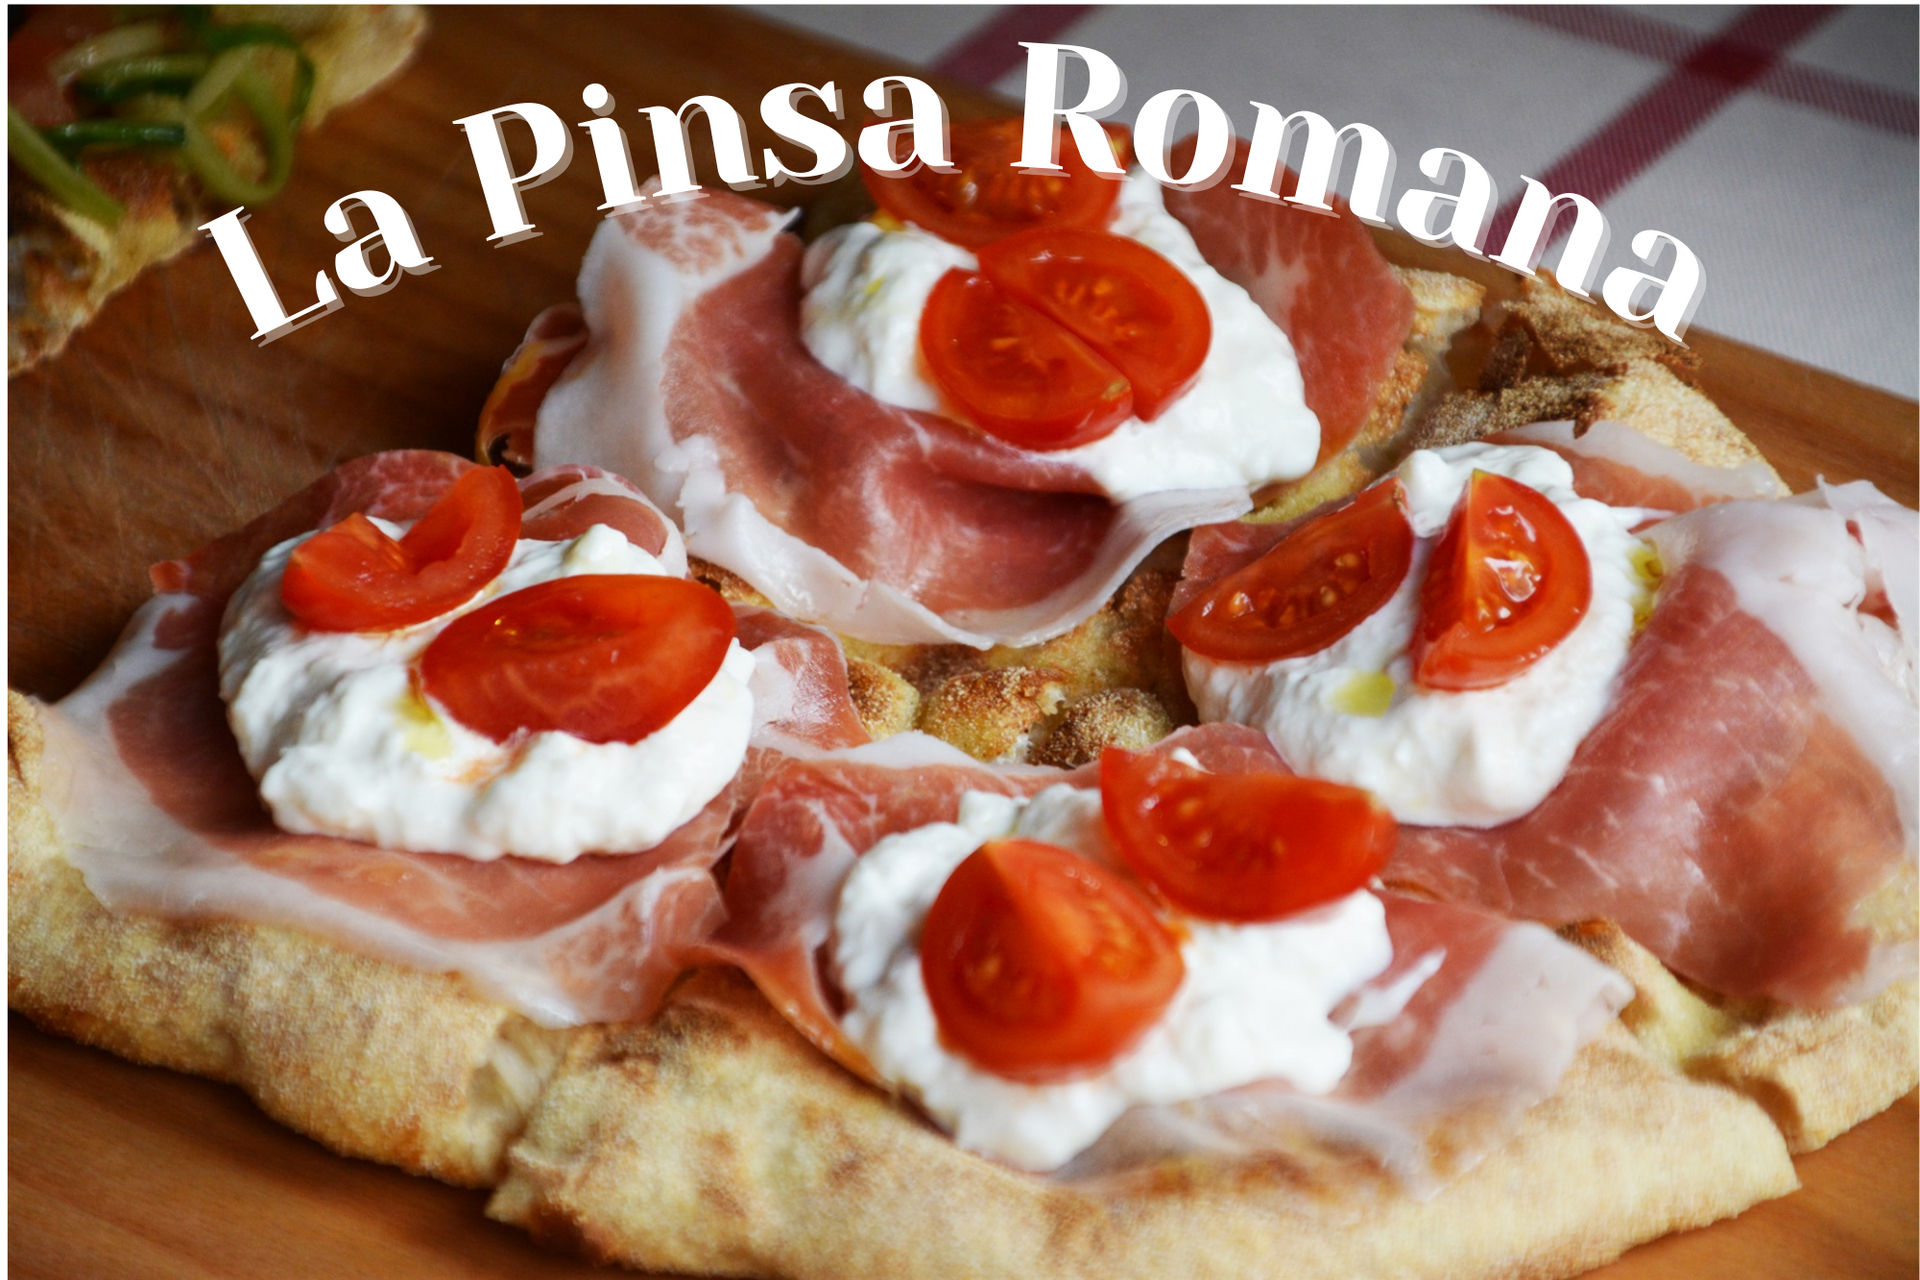 Magnifico you to All know about need Romana – Pinsa Food